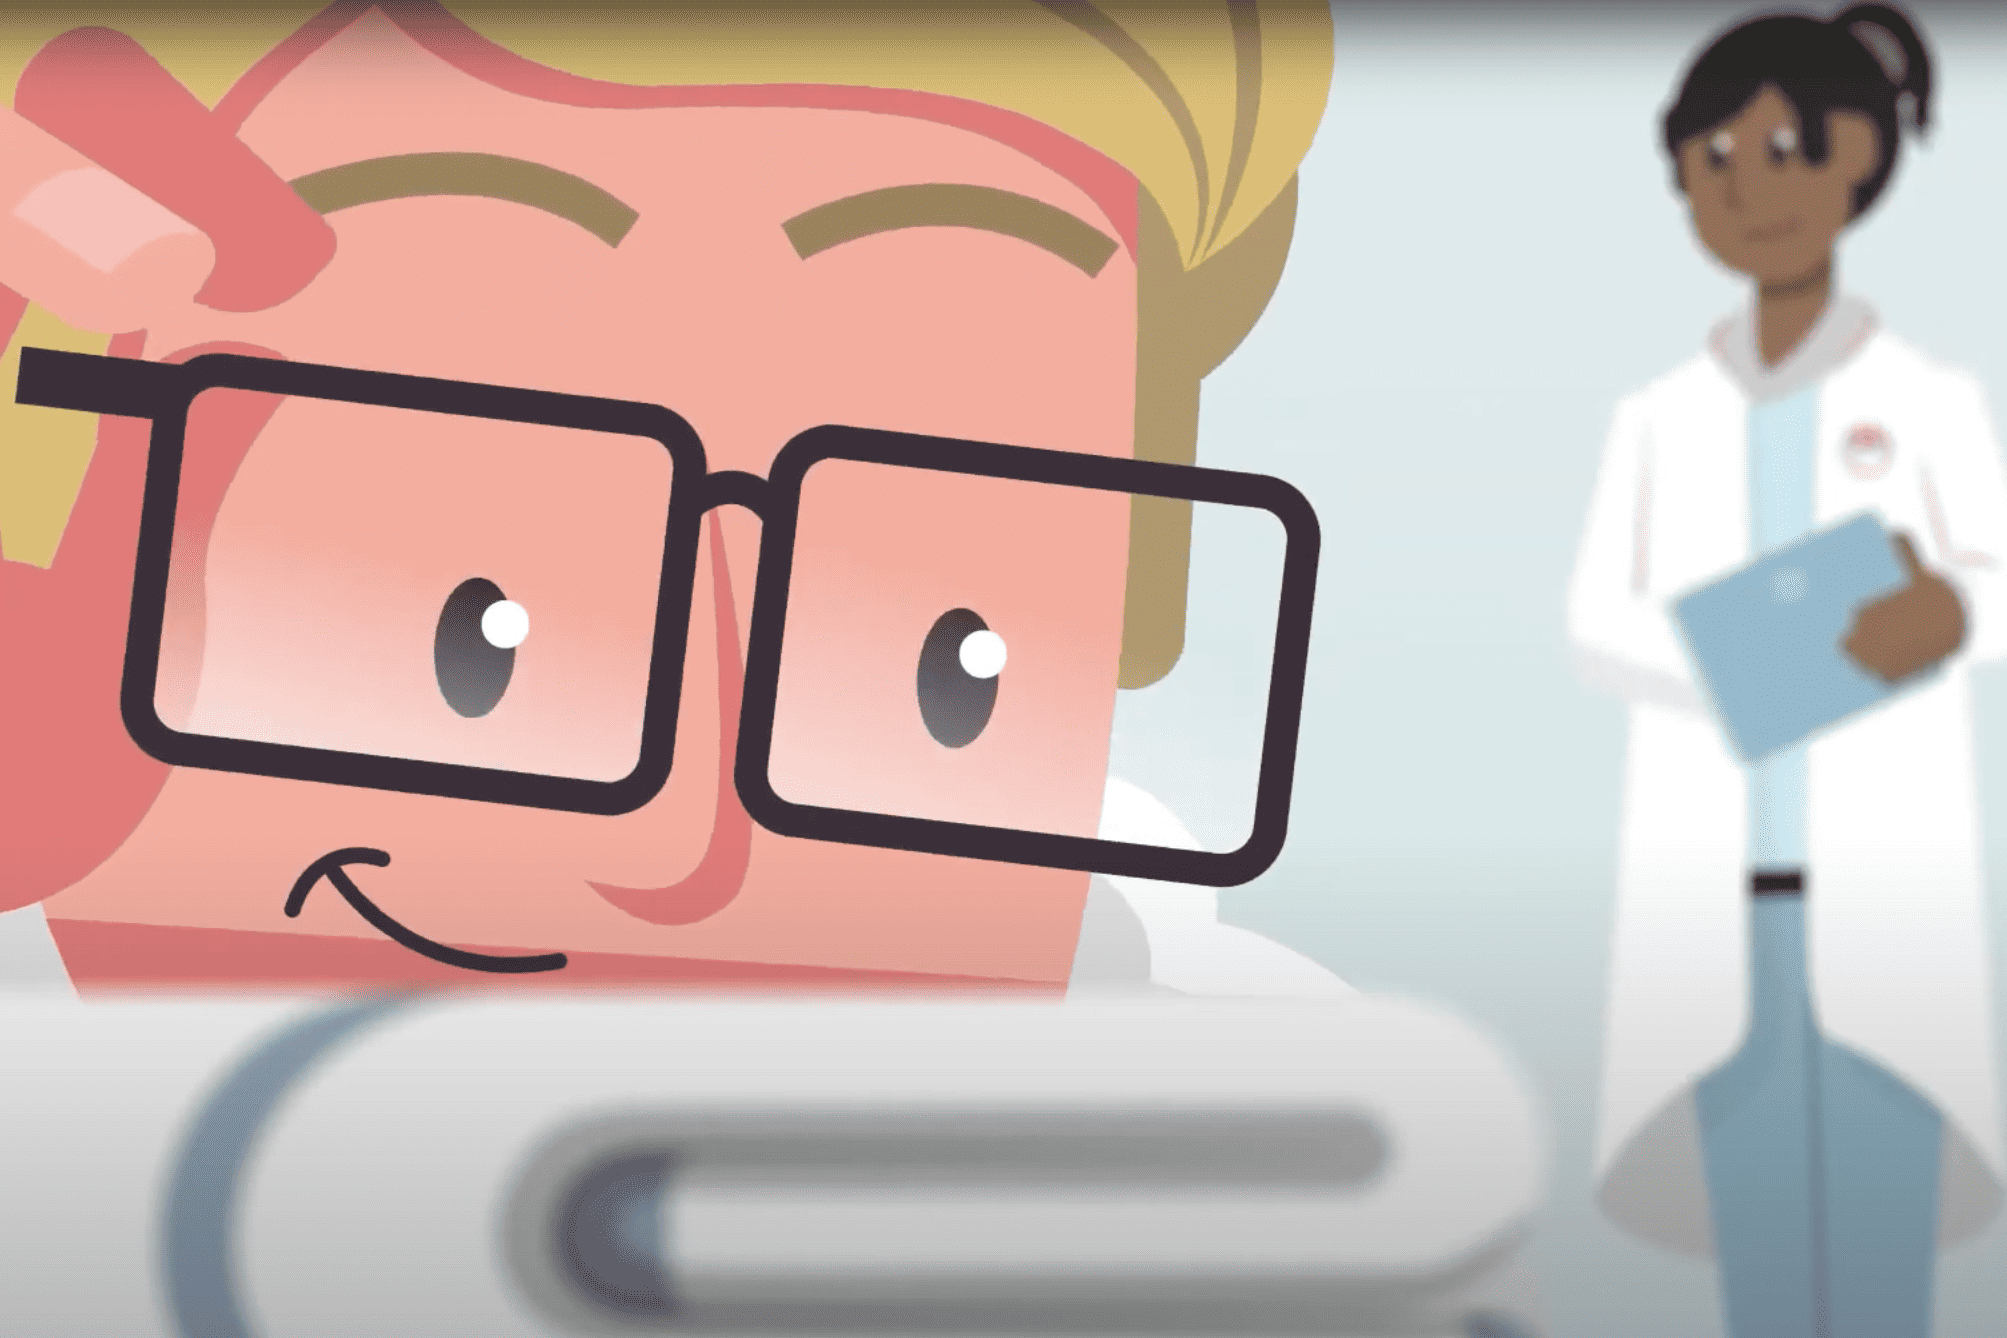 A stylized animation with a large, smiling face wearing glasses in the foreground and a person in a white coat holding a clipboard in the background.